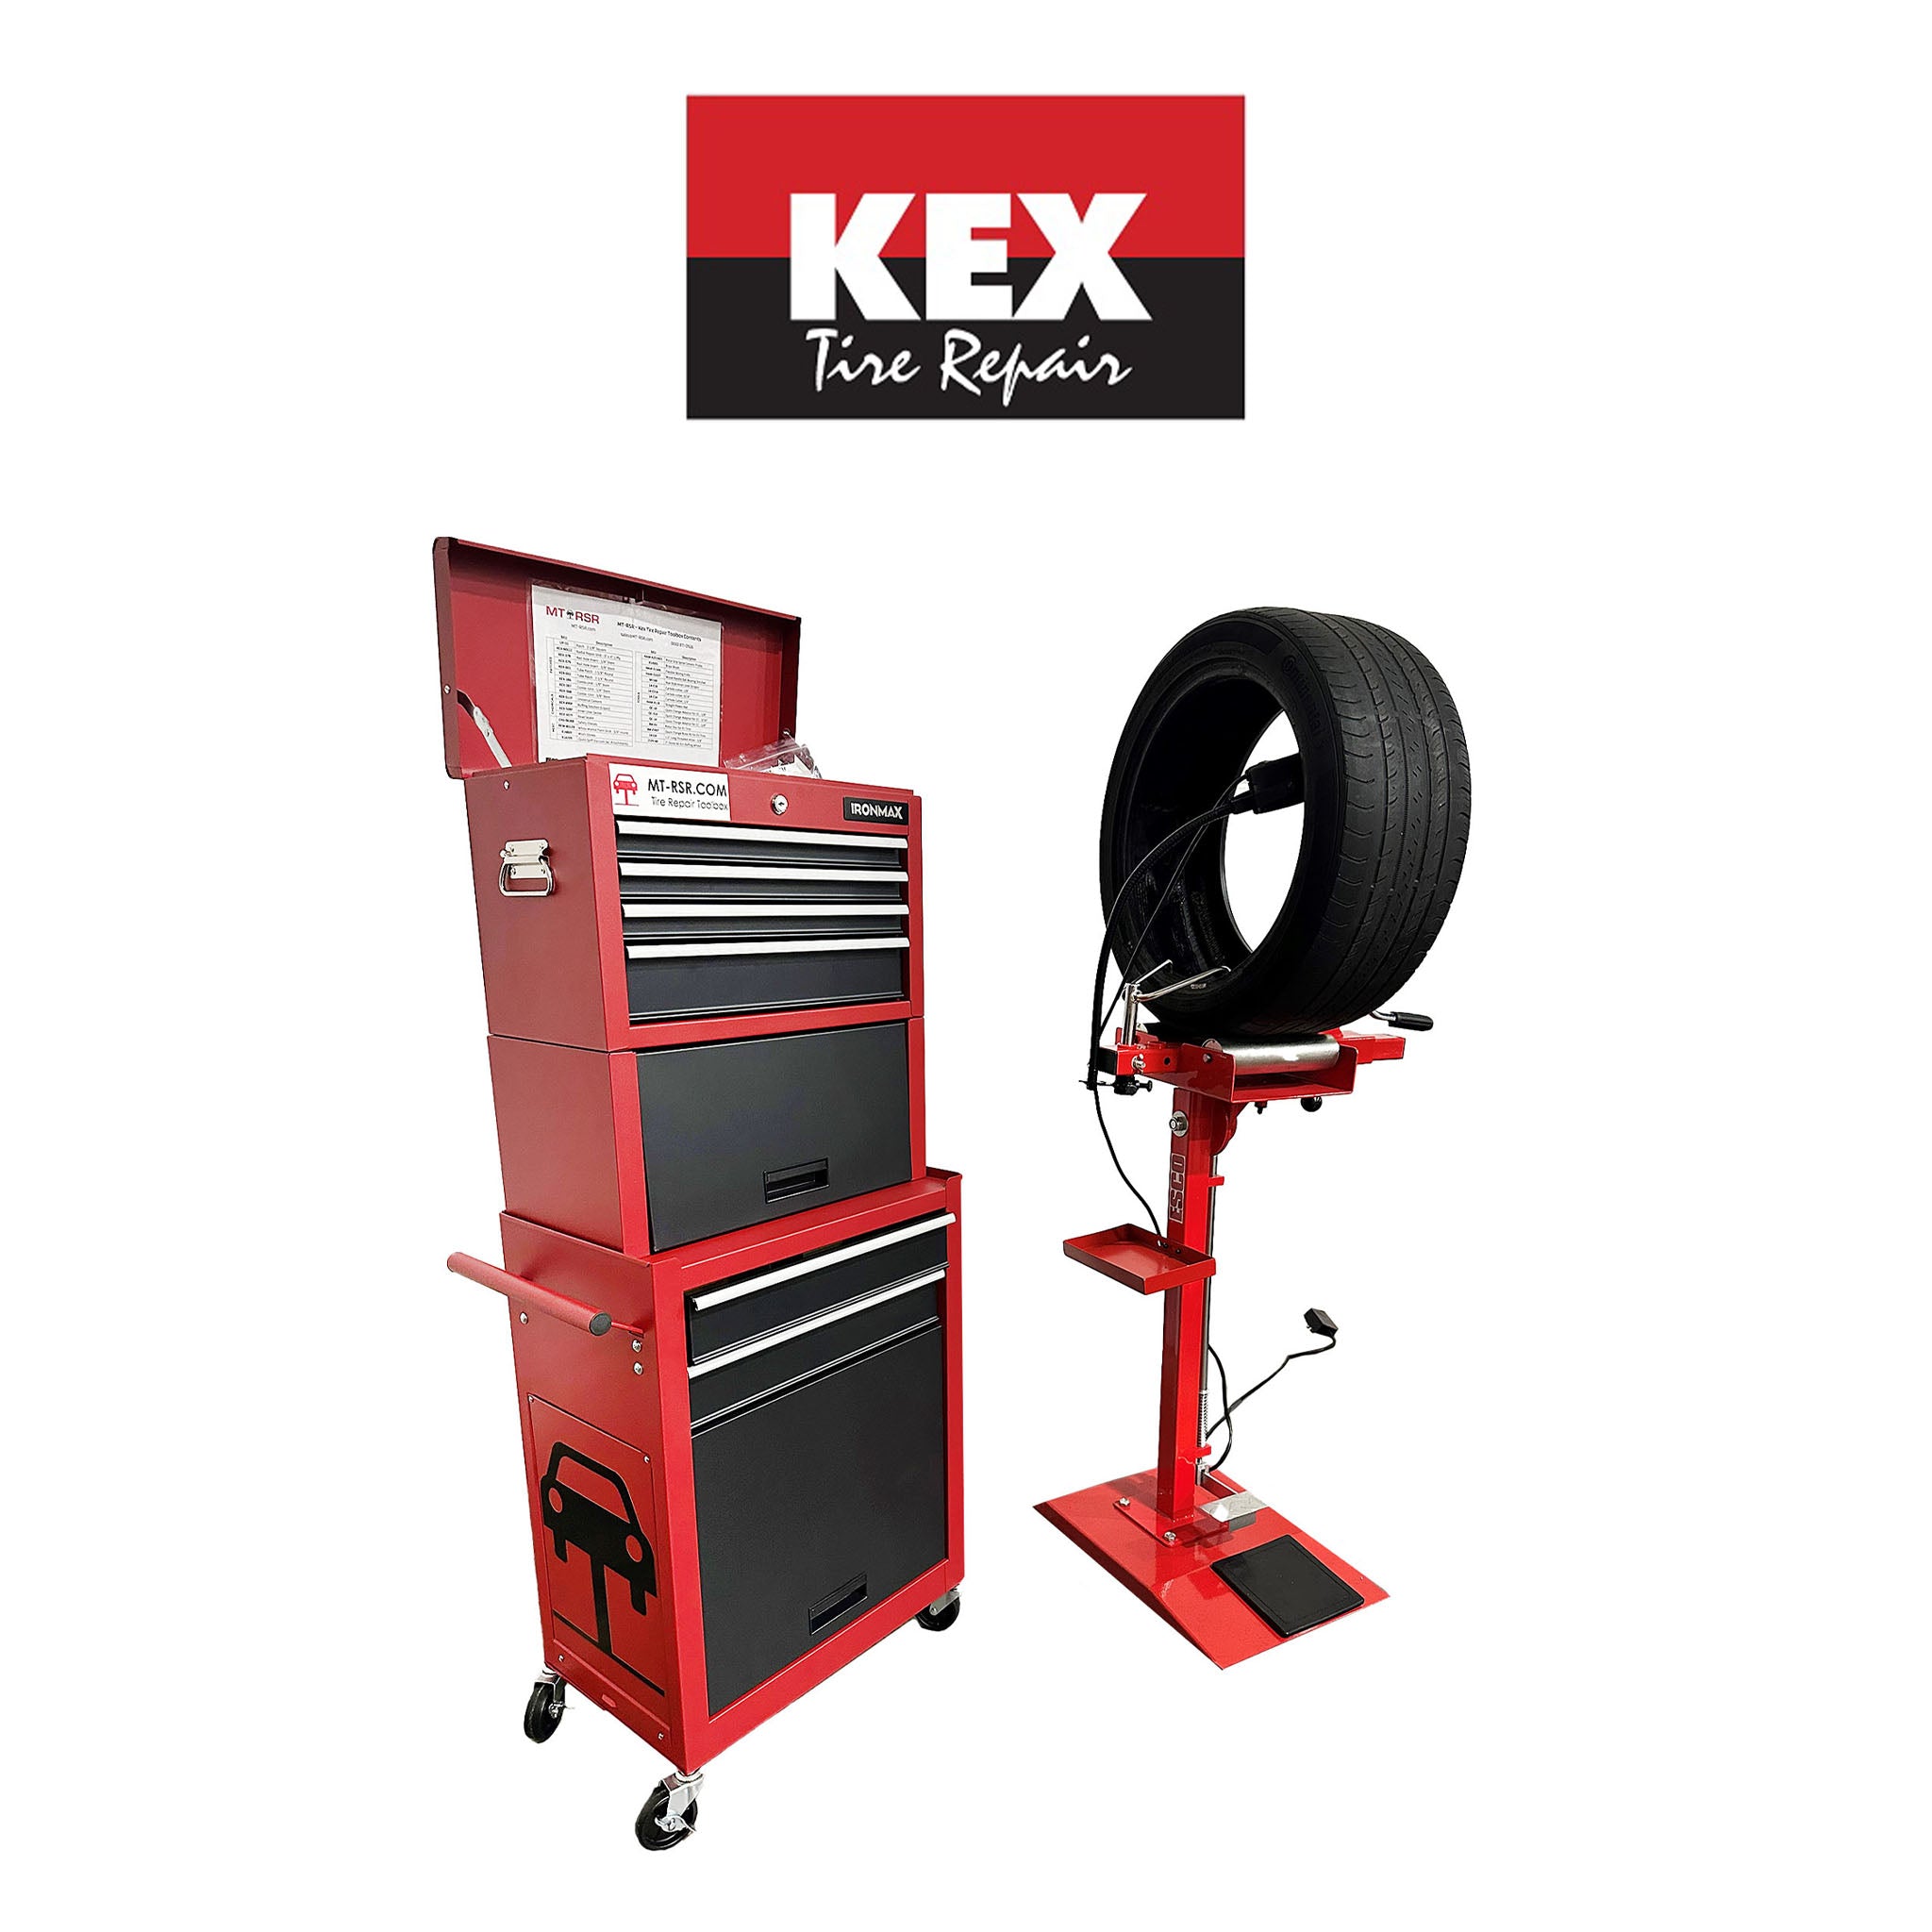 "MT-RSR - Kex - Tire Repair Toolbox, w/ Worklight, Tire Spreader, Milwaukee Buffer Kit Imagine a tire repair solution that's not only efficient but also fits seamlessly into any shop environment. Our new tire repair toolbox boasts a slim, compact design, ensuring it fits easily into your shop. This simplifies deployment in any location, enabling you to establish a tire repair station anywhere in your shop or territory with ease. Contains all needed tools, and Kex patches, plugs, and chemicals. "